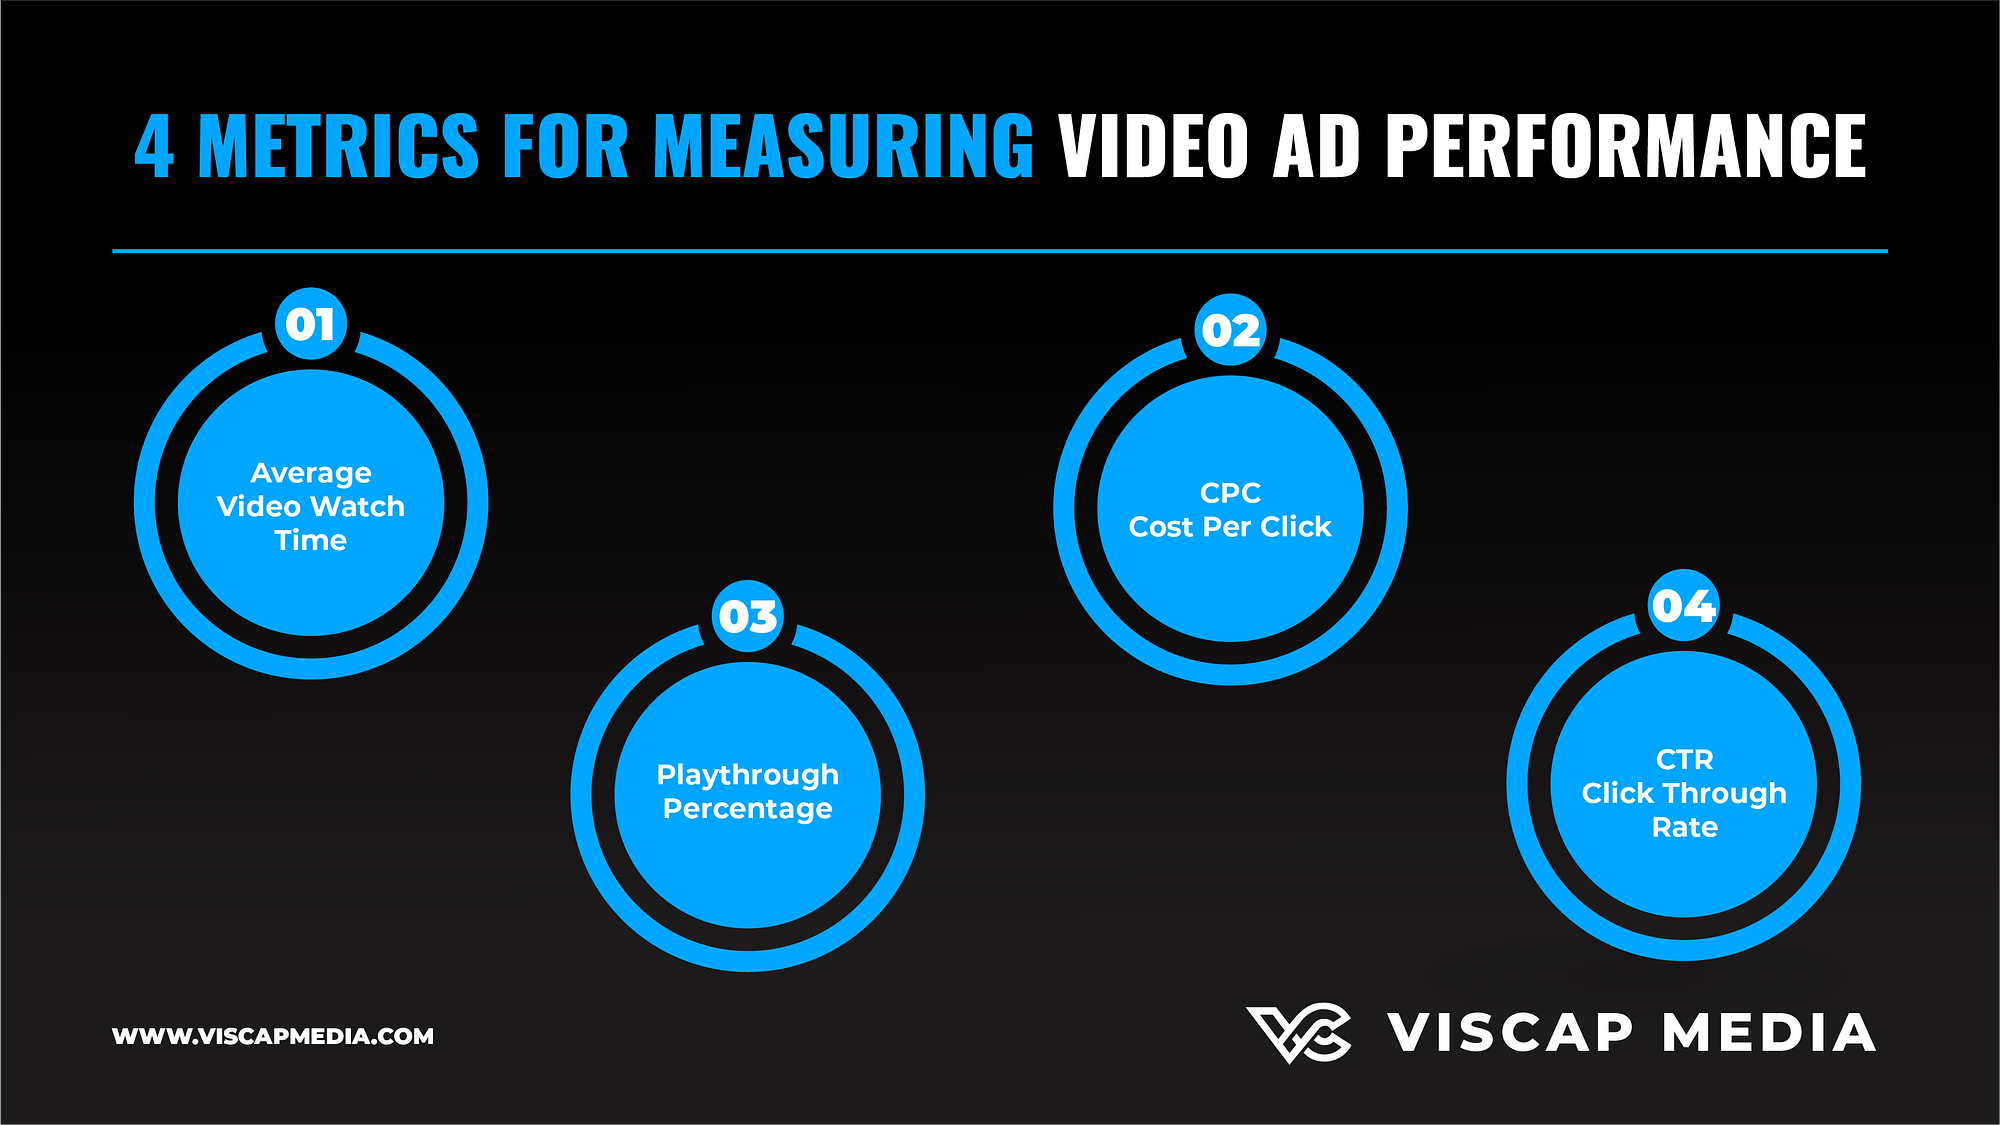 4 Metrics For Measuring Video Ad Performance Infographic For High-Converting Video Ads